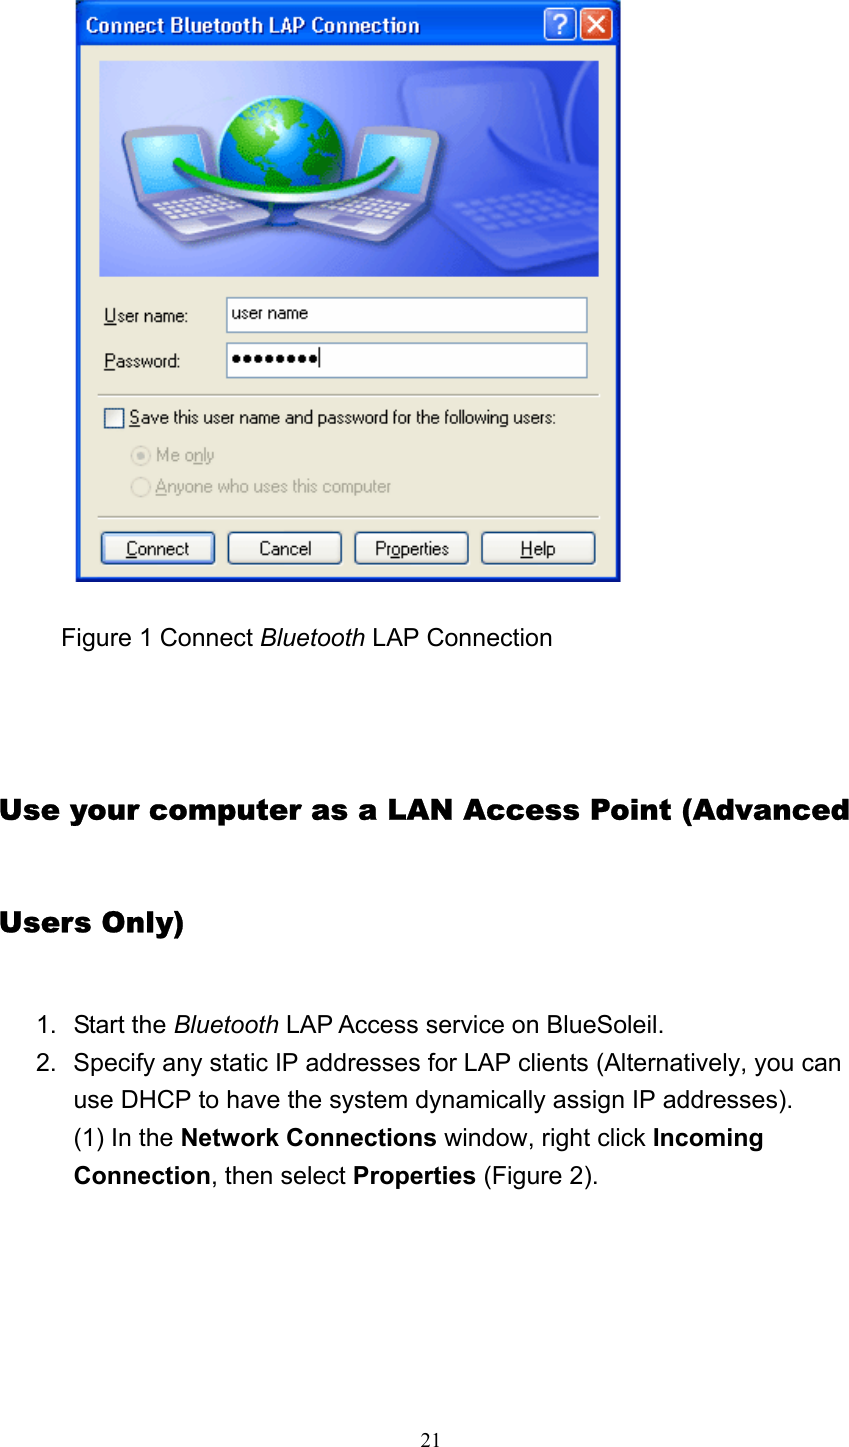   21           Figure 1 Connect Bluetooth LAP Connection       Use your computer as a LAN Access Point (Advanced Users Only) 1. Start the Bluetooth LAP Access service on BlueSoleil.   2.  Specify any static IP addresses for LAP clients (Alternatively, you can use DHCP to have the system dynamically assign IP addresses). (1) In the Network Connections window, right click Incoming Connection, then select Properties (Figure 2). 